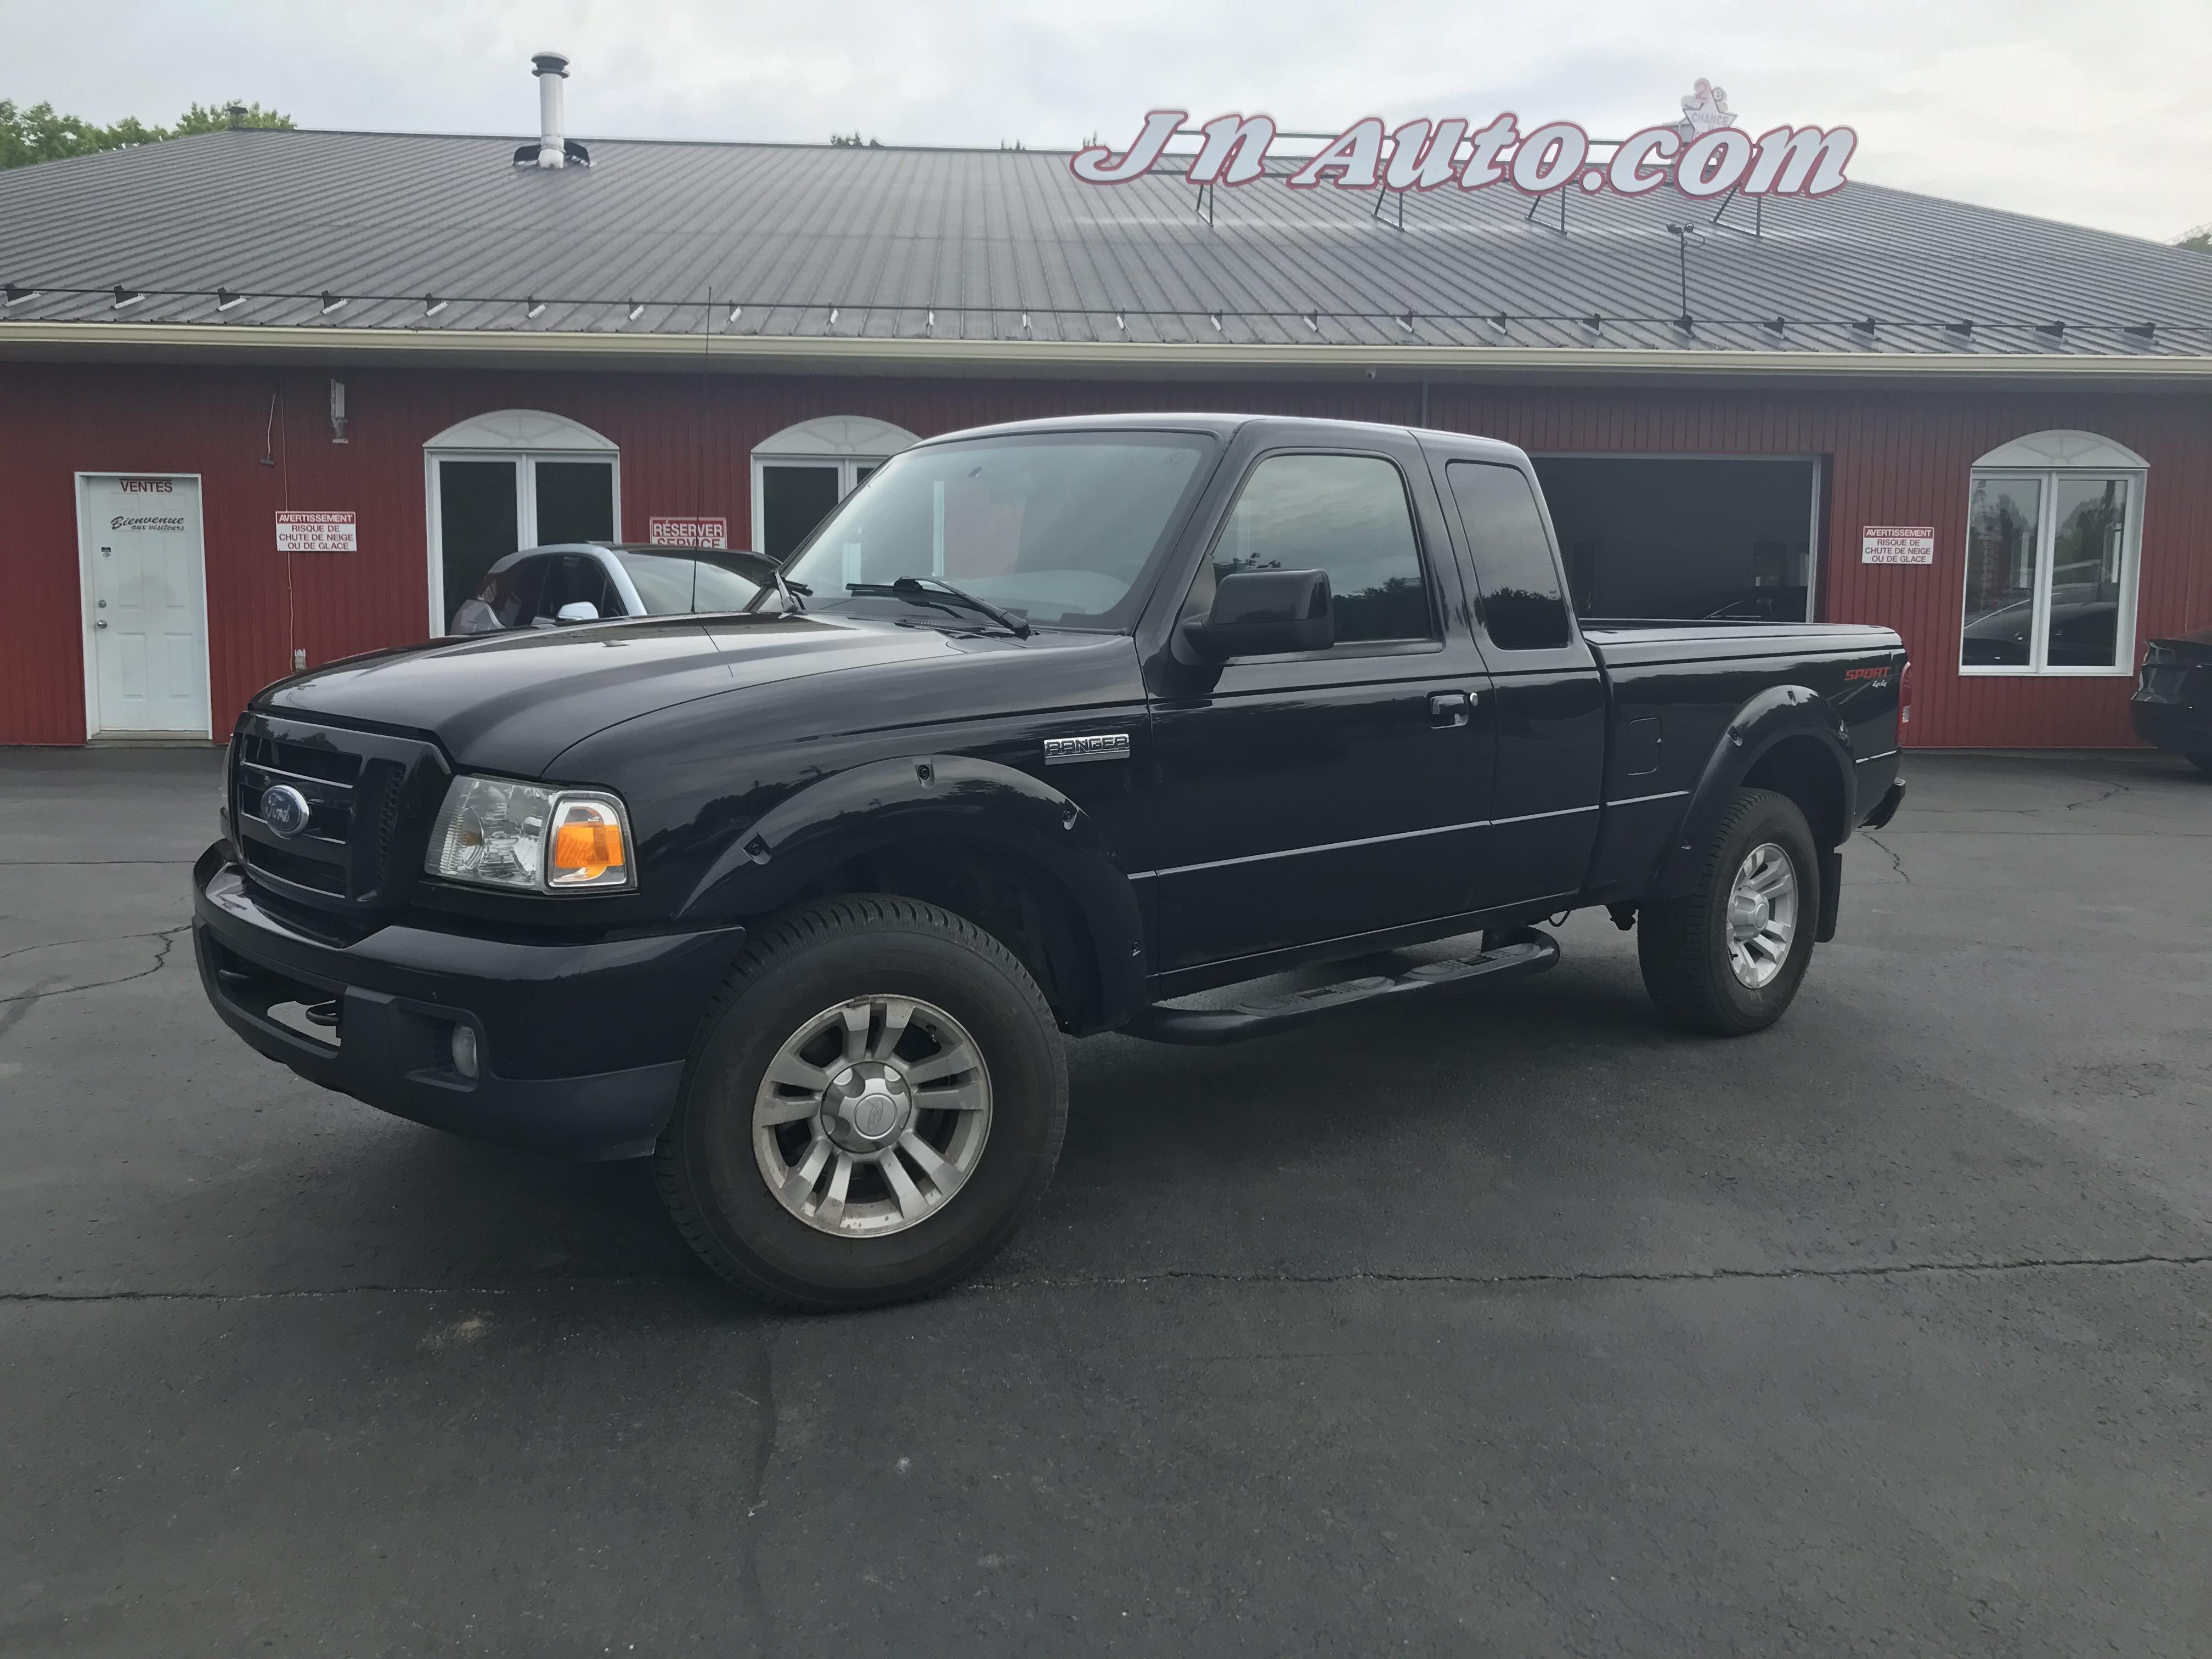 2007 Ford Ranger 4.0 Towing Capacity